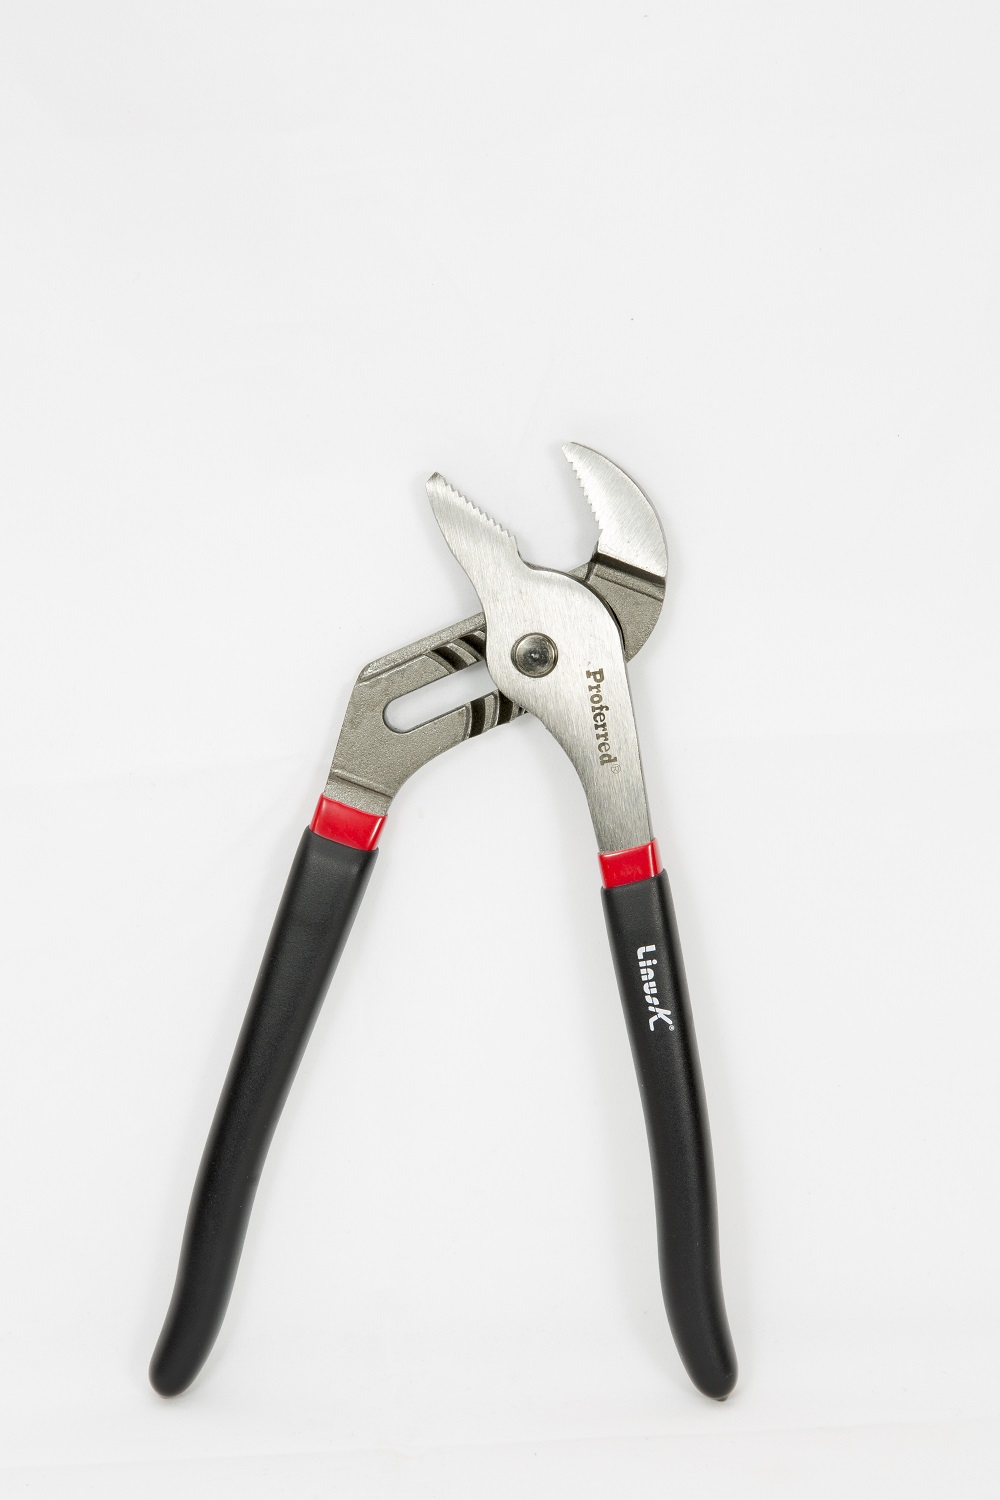 PROFERRED PLIERS STRAIGHT JAW GROOVE JOINT COATED GRIP 10'' 